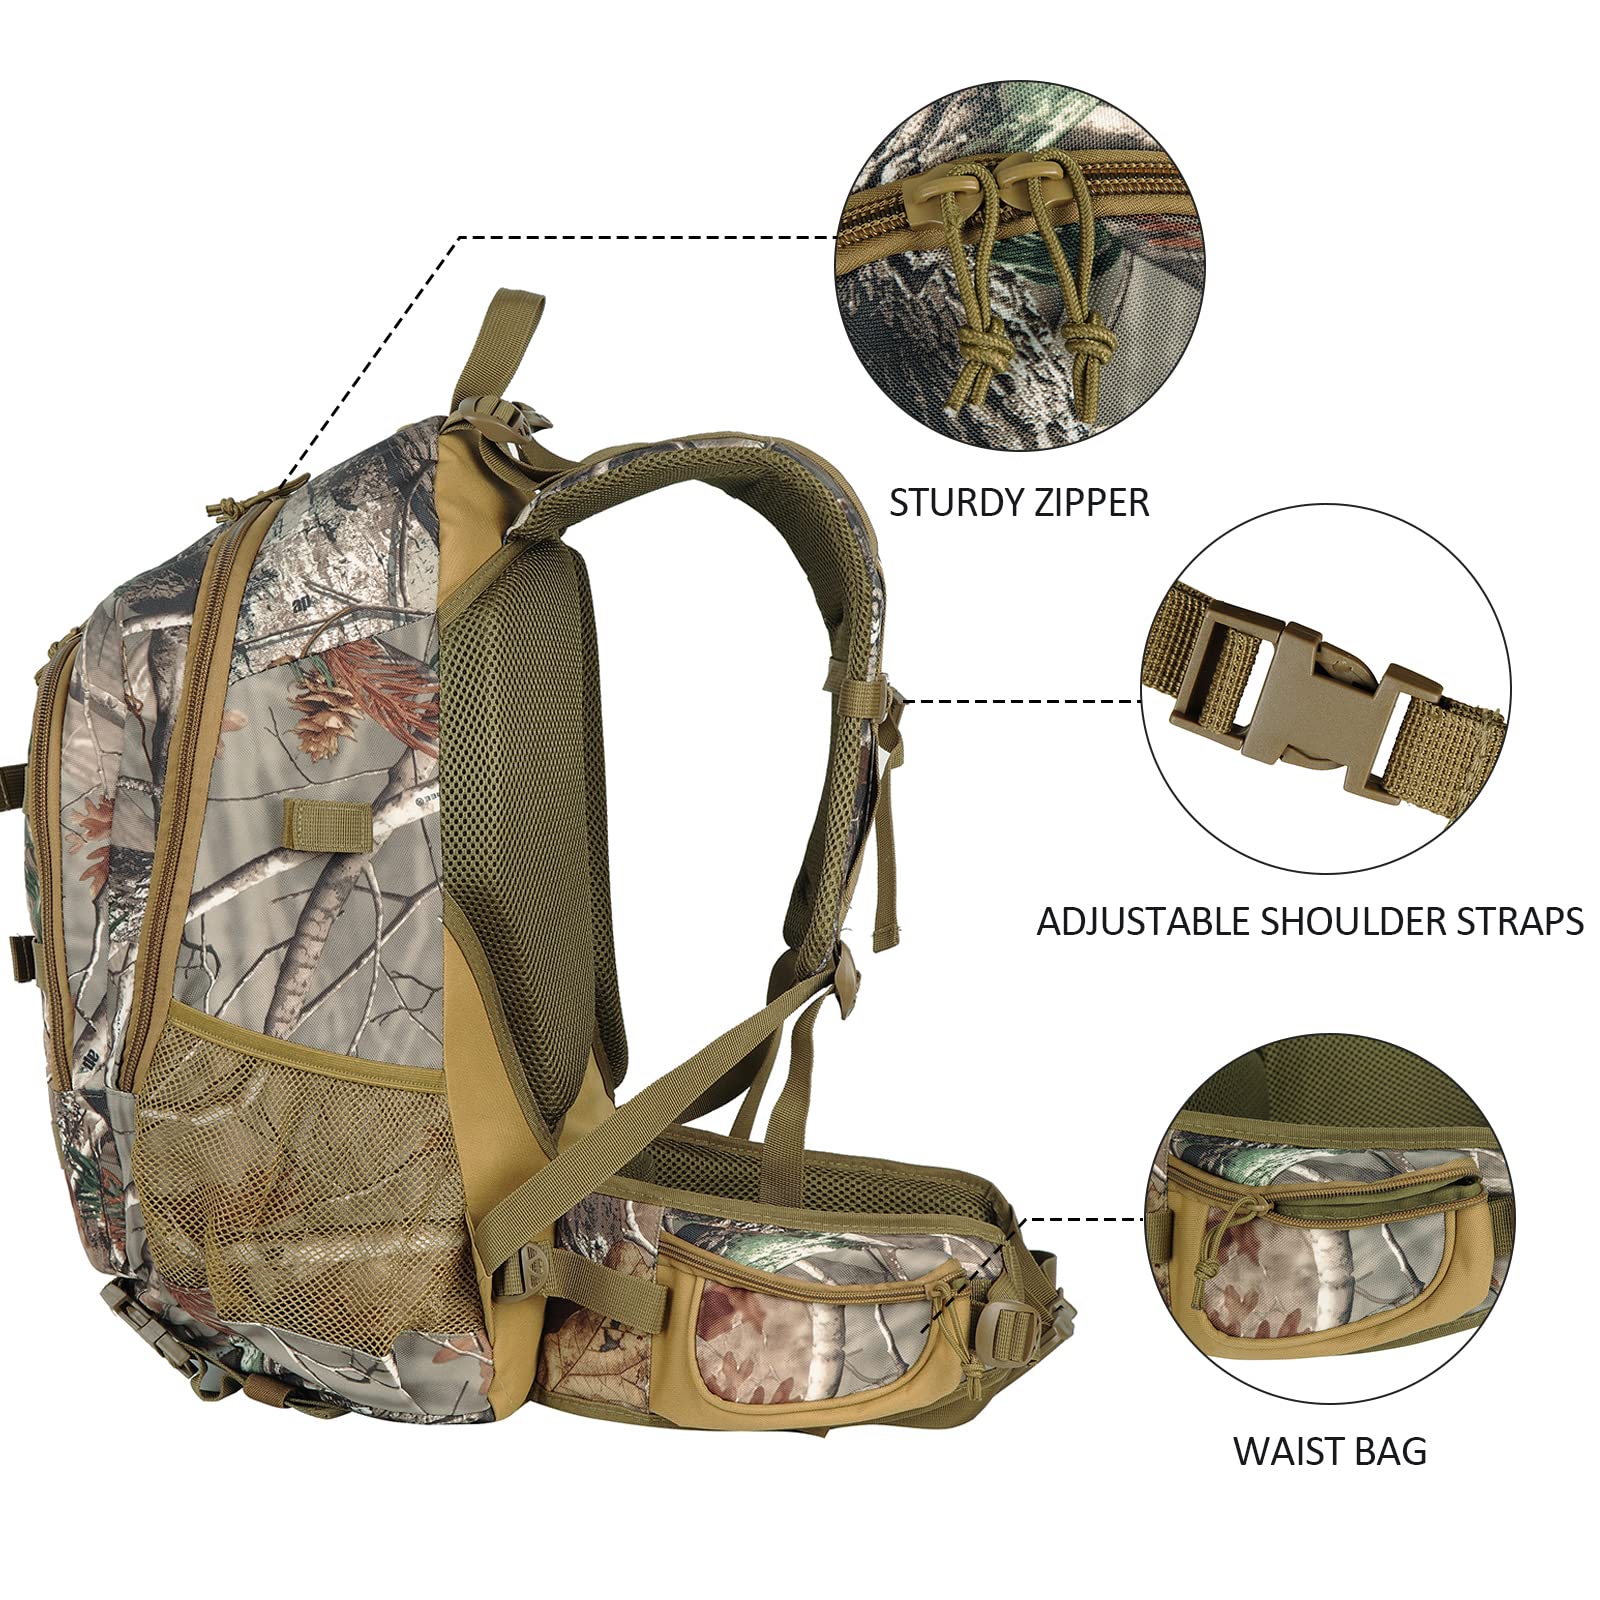 AUMTISC Camo Hunting Backpack with Rifle Holder and Waterproof Rain Cover, Outdoor Day pack Hiking Bag for Rifle Gun Bow, Travel Packs for Camping Climbing,Camouflage